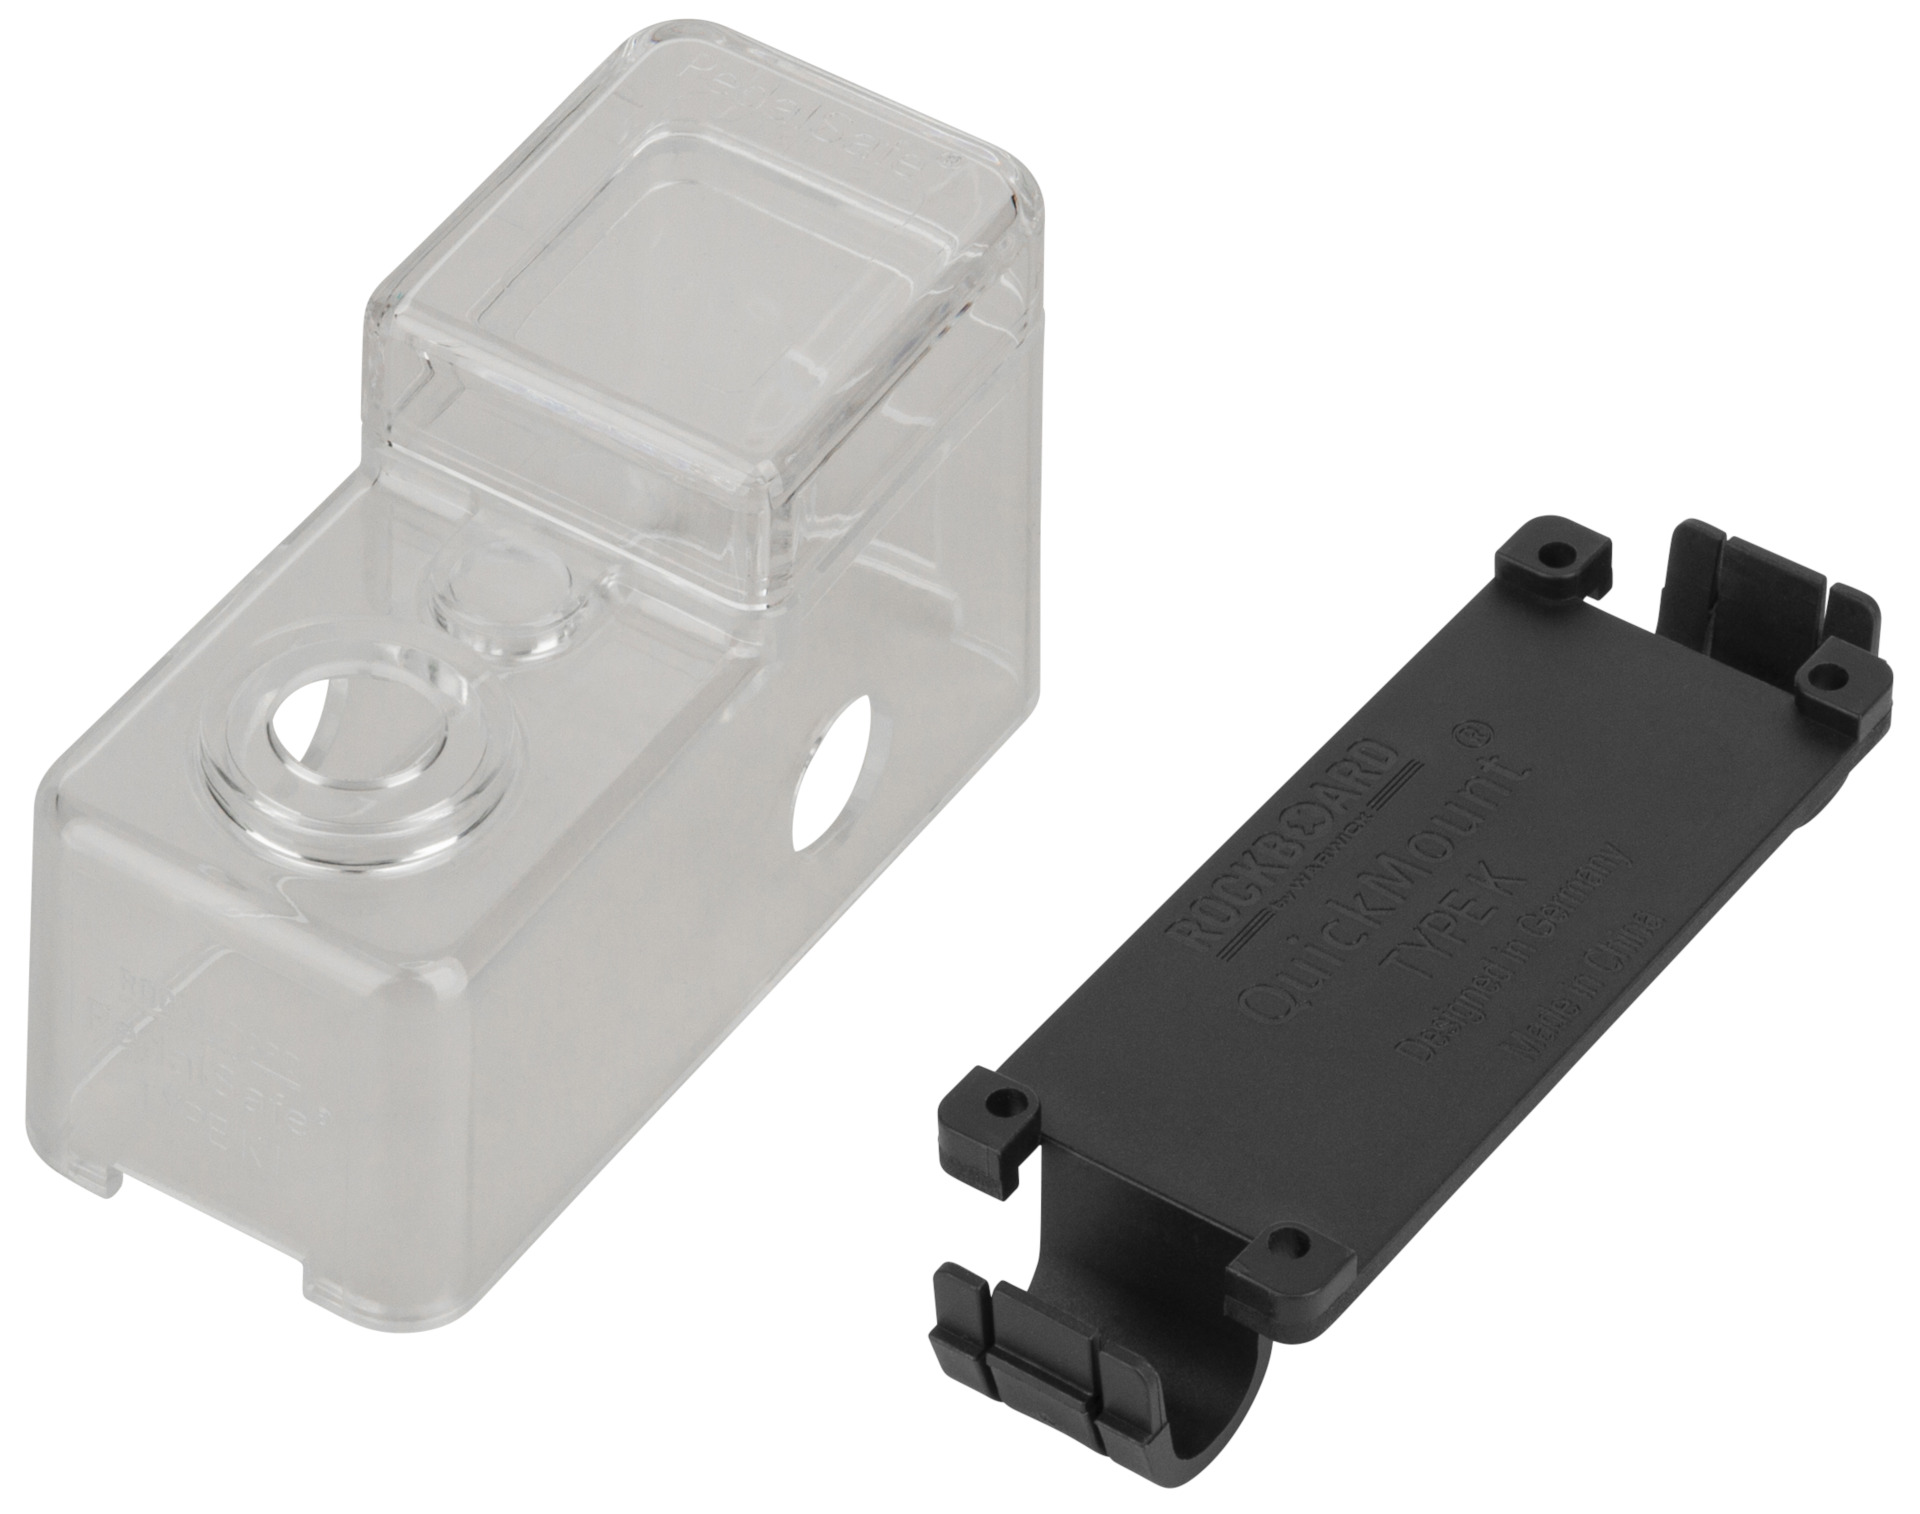 RockBoard PedalSafe Type K1 - Protective Cover And RockBoard Mounting Plate For Mooer Micro Series Pedals